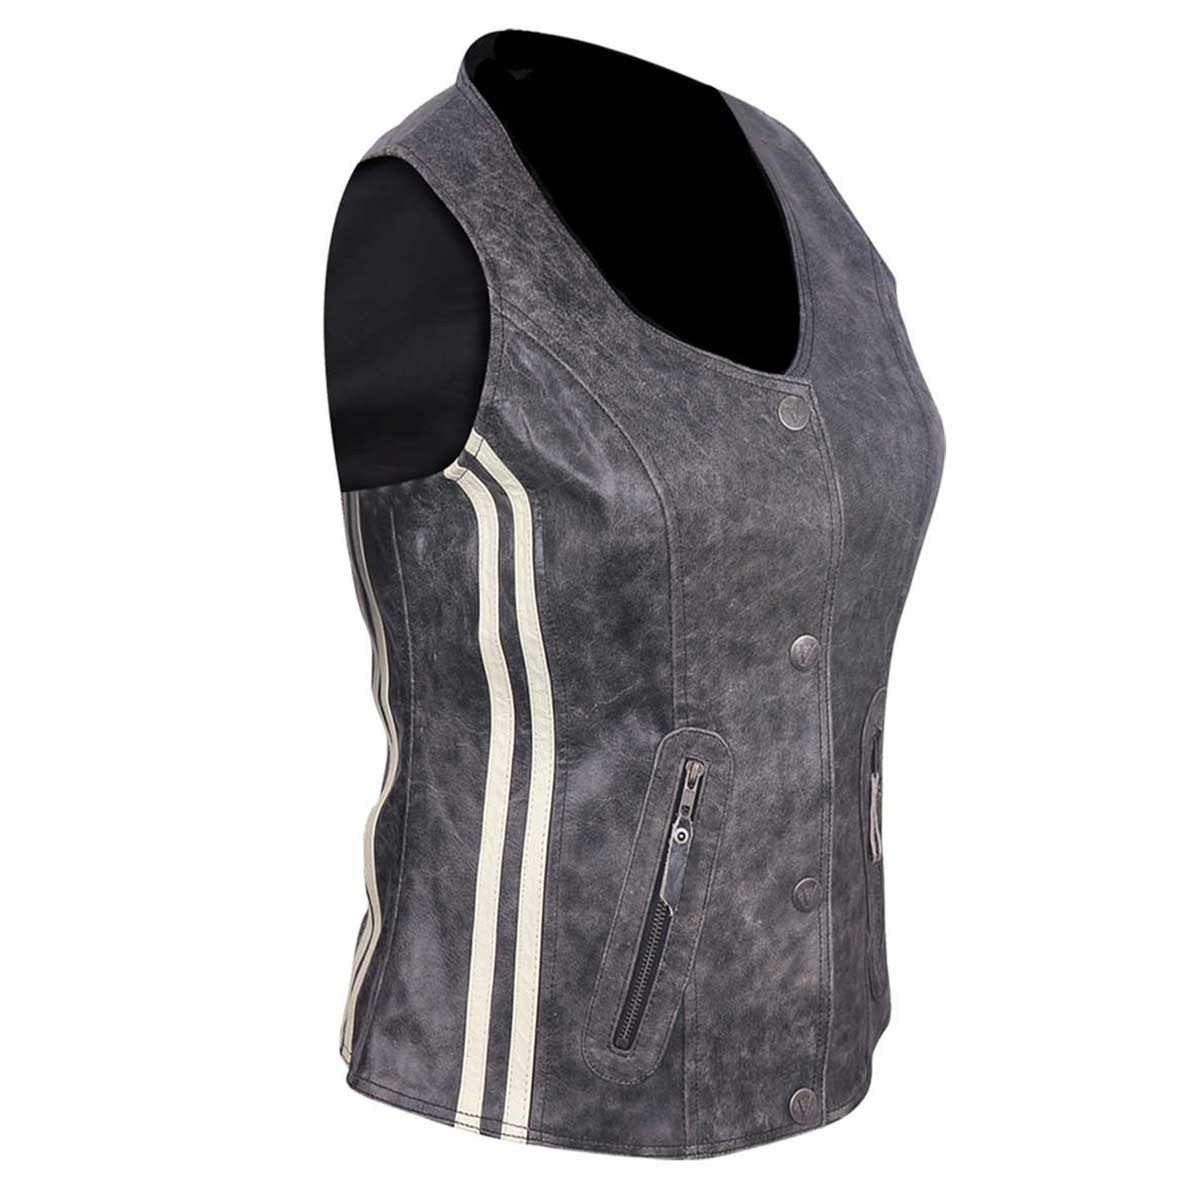 Vance Leather Ladies Distressed Gray Vest with Vertical Stripes